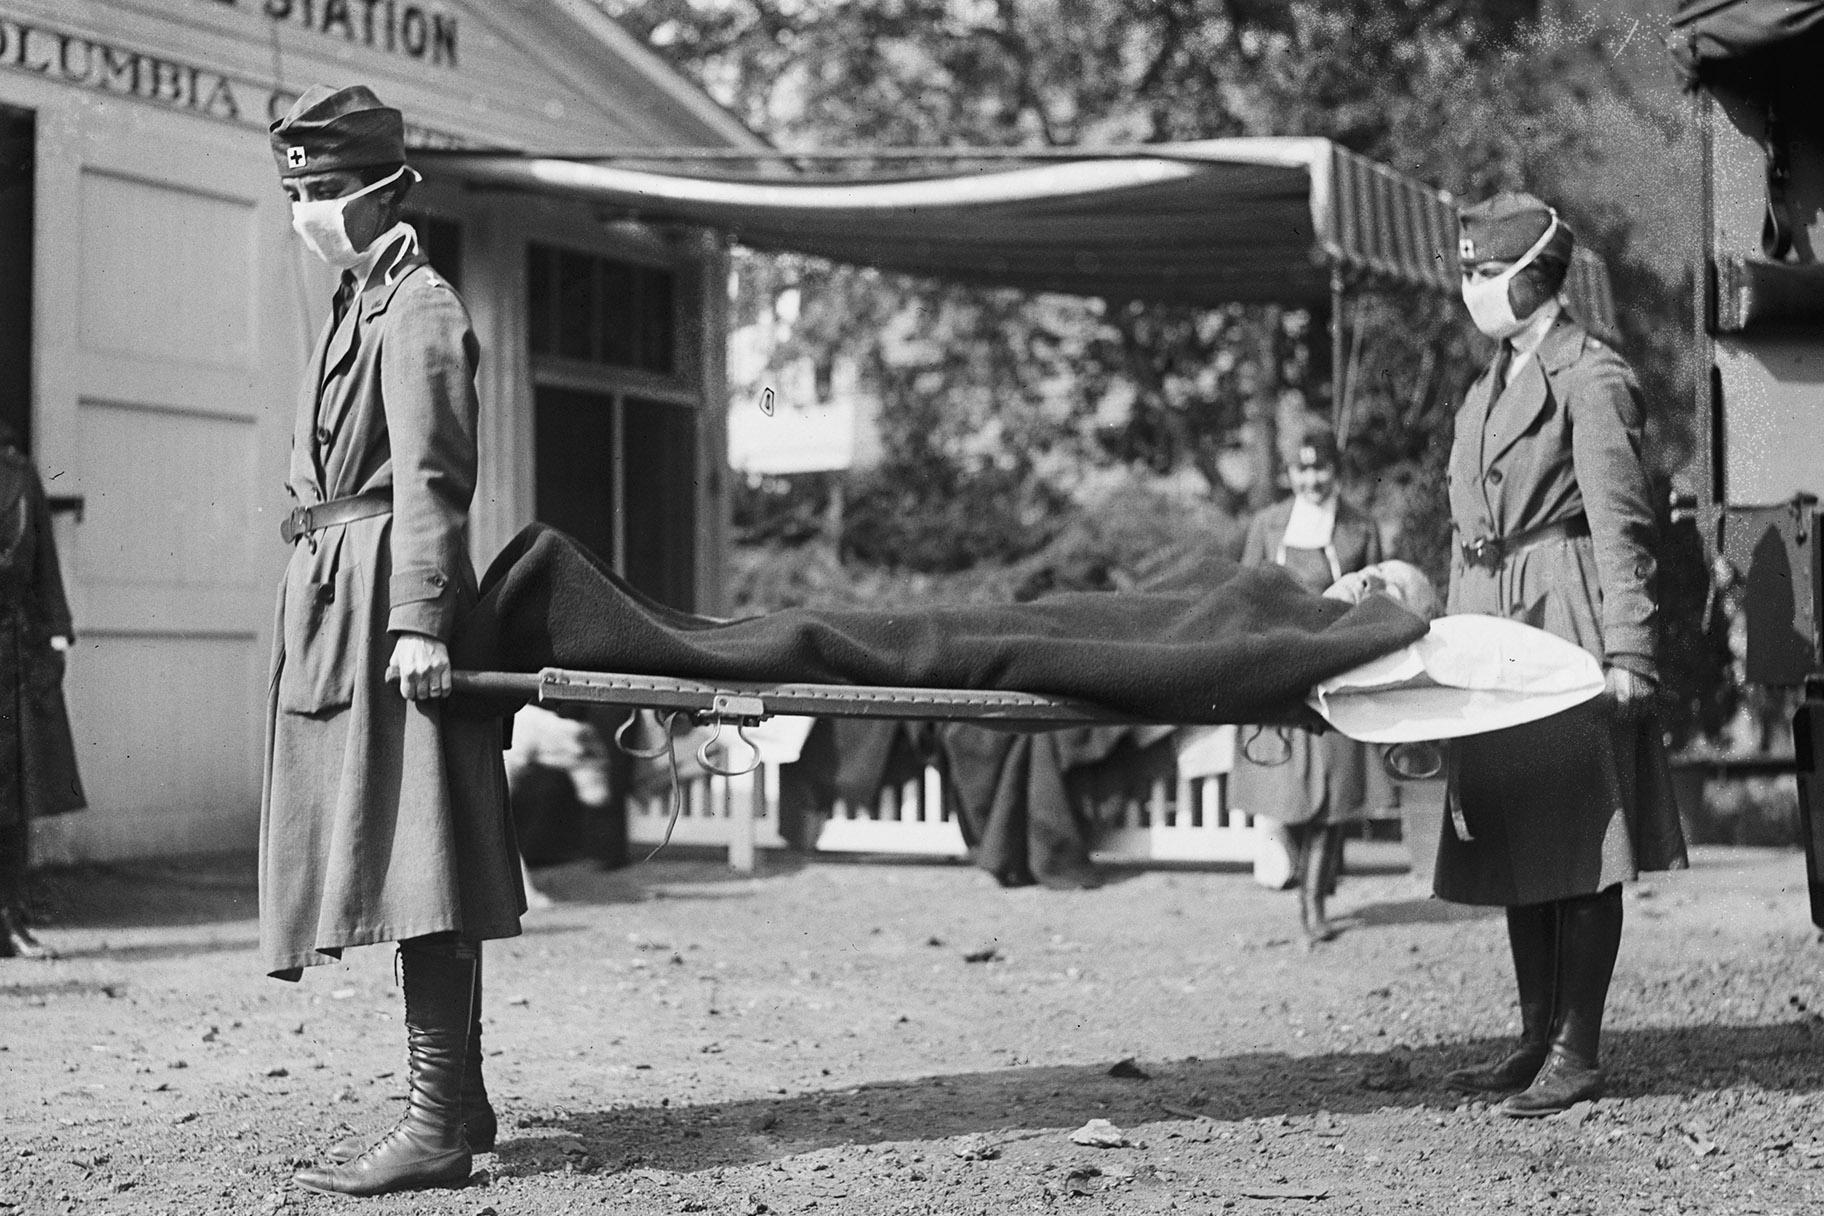 This photo made available by the Library of Congress shows a demonstration at the Red Cross Emergency Ambulance Station in Washington during the influenza pandemic of 1918. (Library of Congress via AP, File)